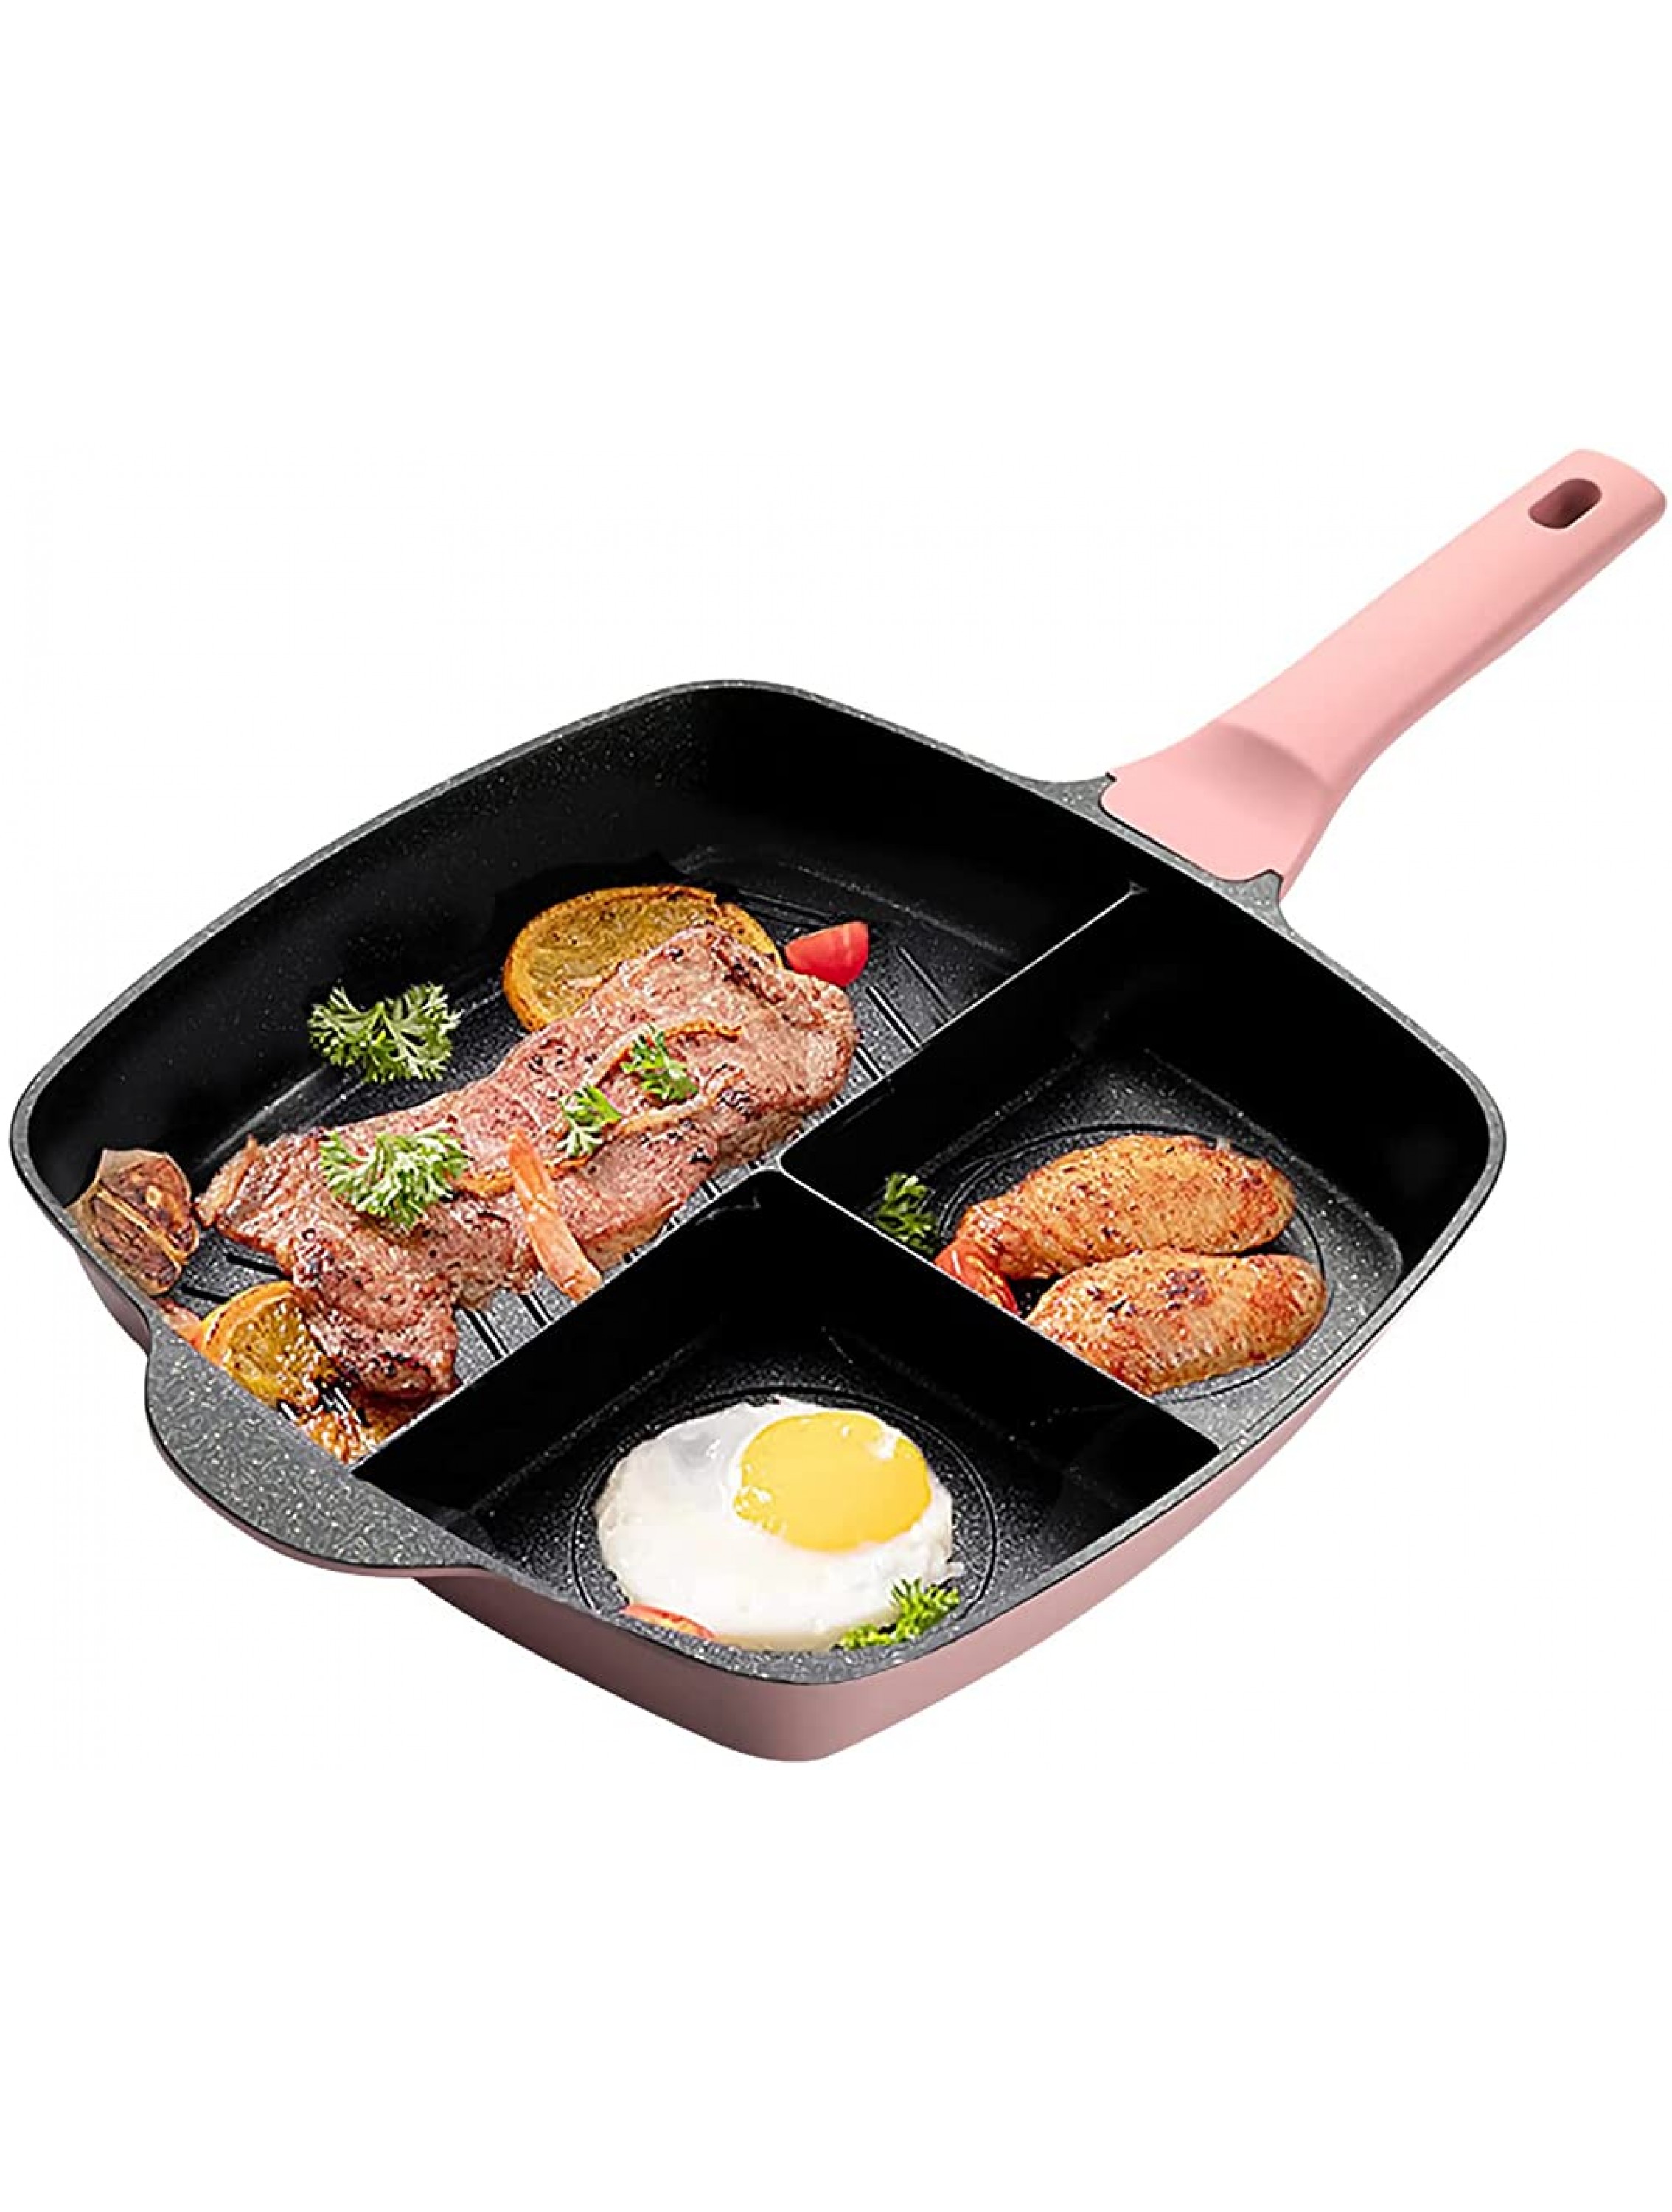 MANO Divided Frying Grill Pan Nonstick Griddle Pan 3 Section Skillet For Gas Stove & Induction Cooker,11 Inch - B4G8GSNFG